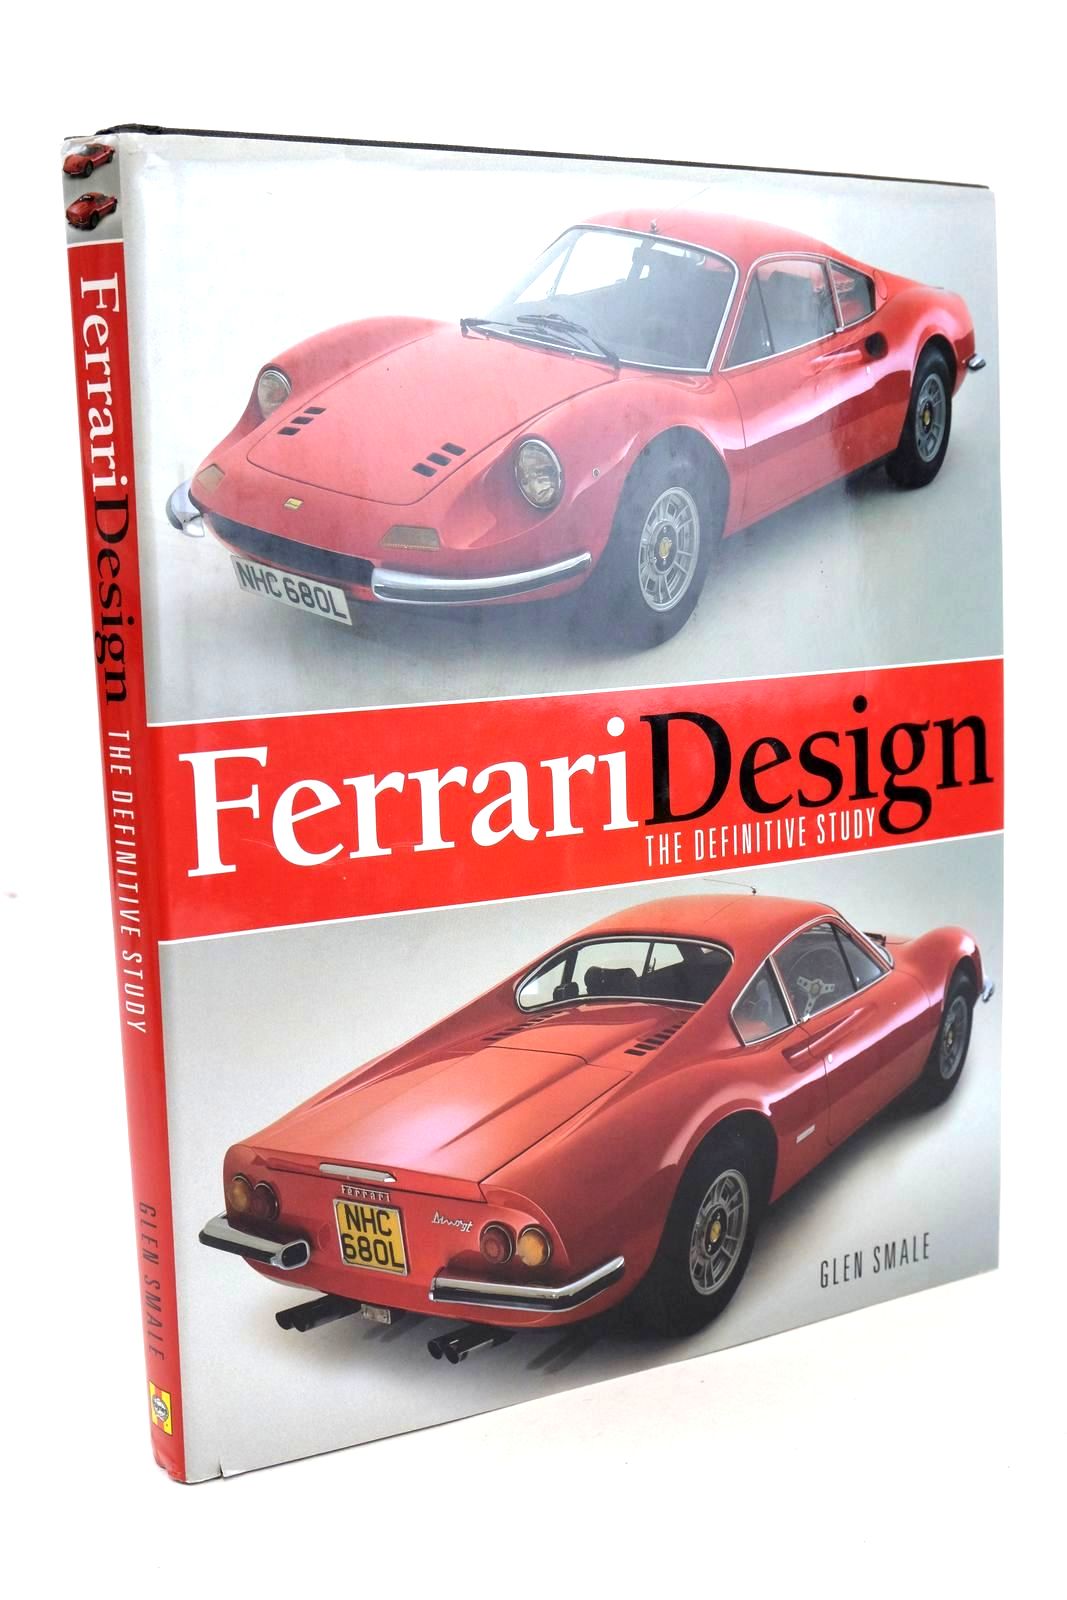 Photo of FERRARI DESIGN THE DEFINITIVE STUDY written by Smale, Glen published by Haynes Publishing (STOCK CODE: 1326512)  for sale by Stella & Rose's Books